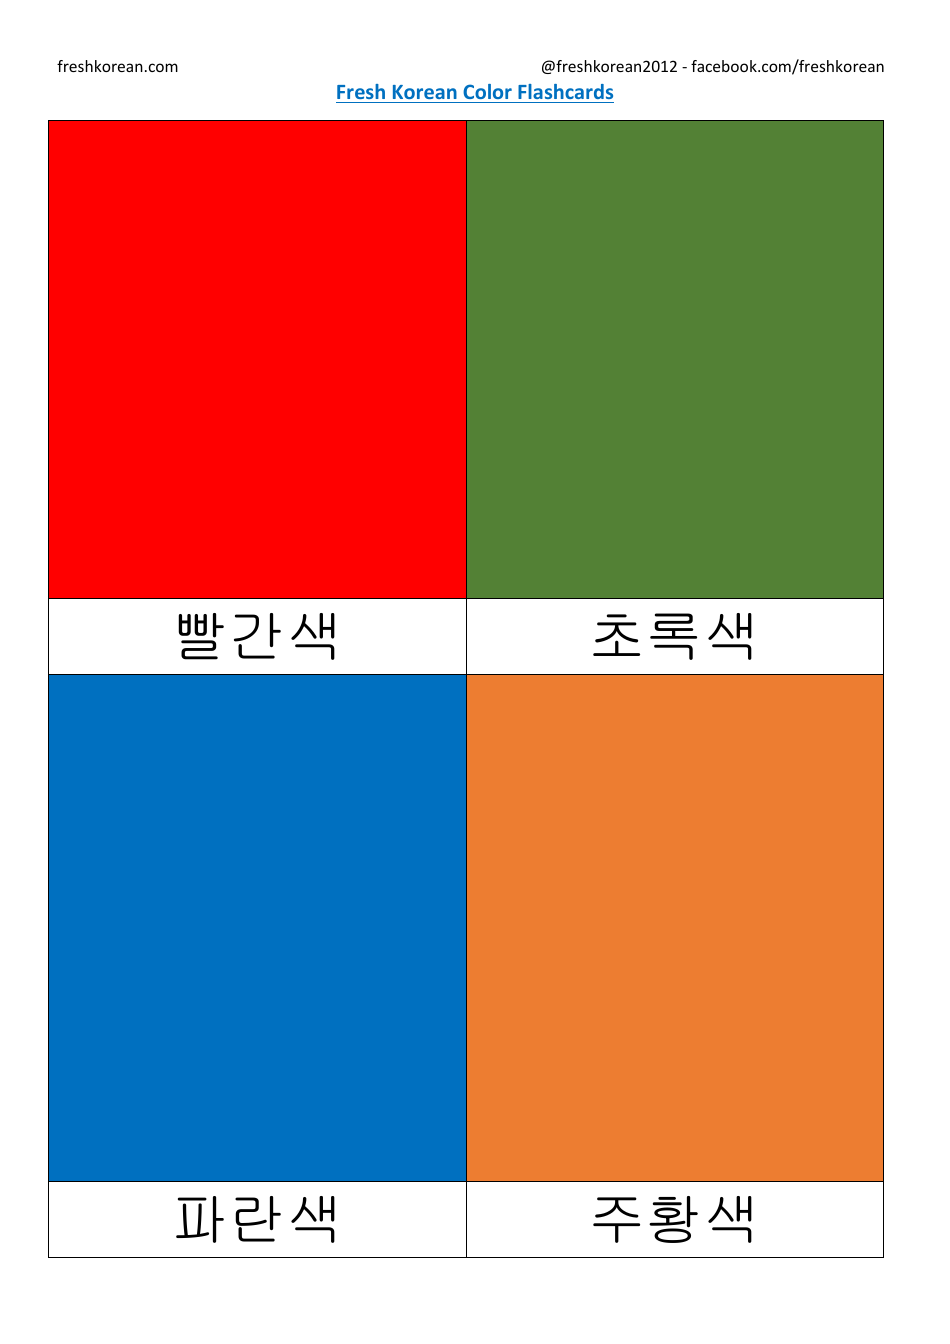 Korean Flashcards - Colors, Page 1